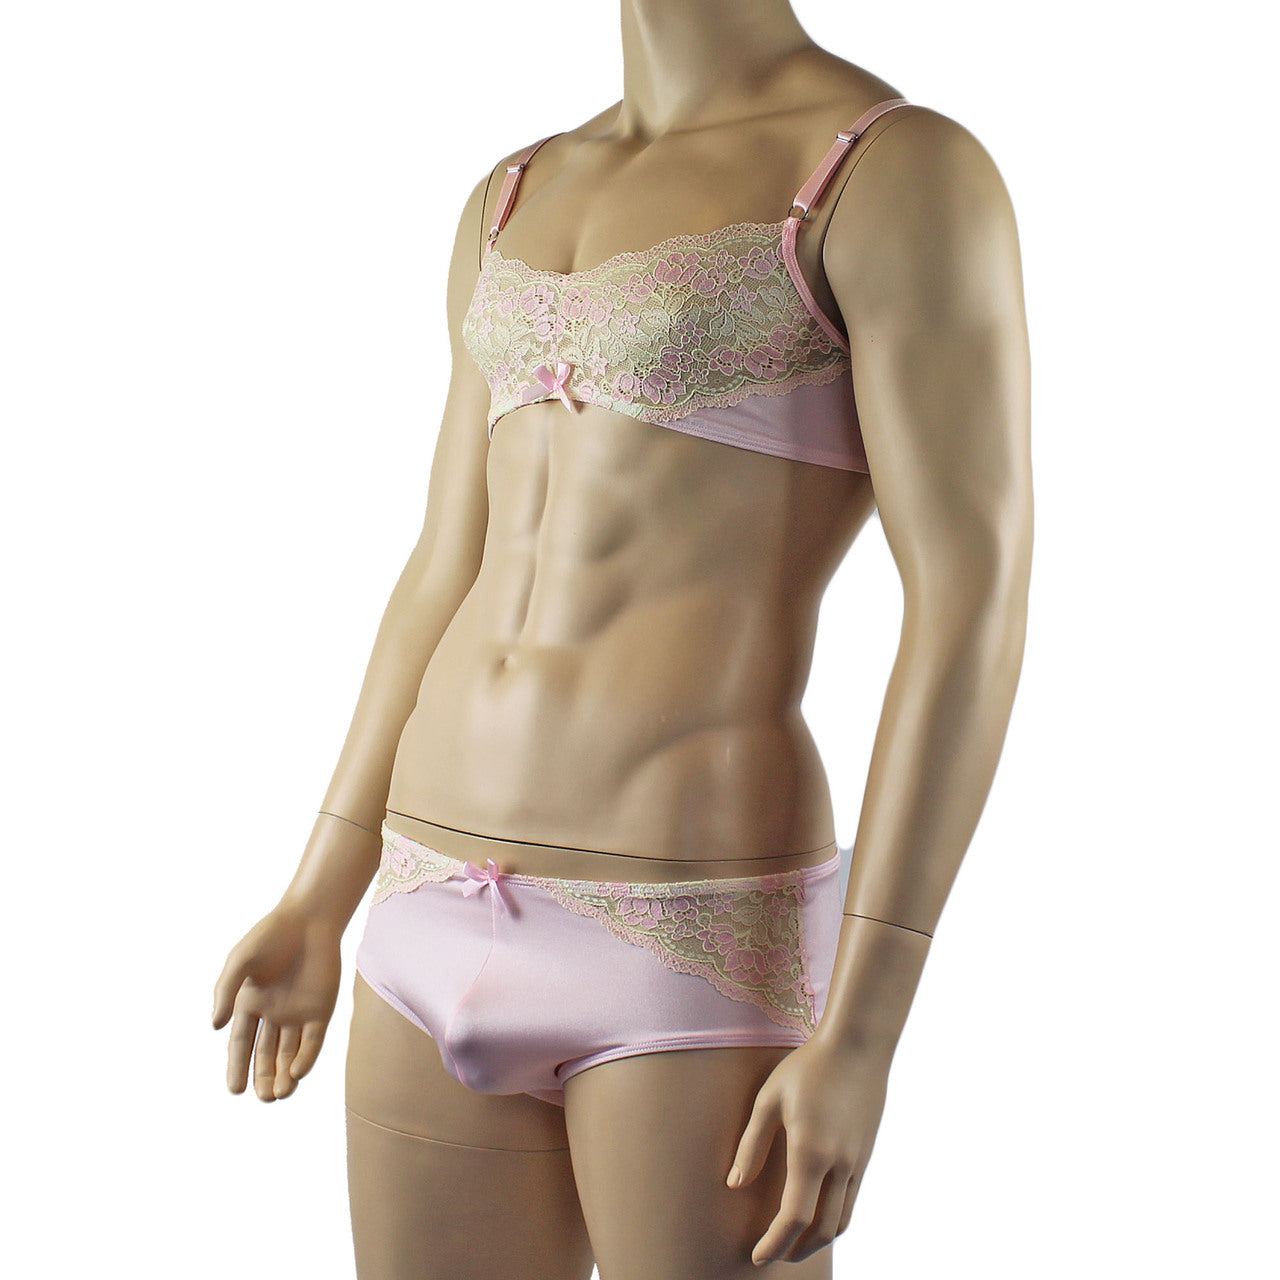 Mens Luxury Bra Top and Boxer Brief Pink